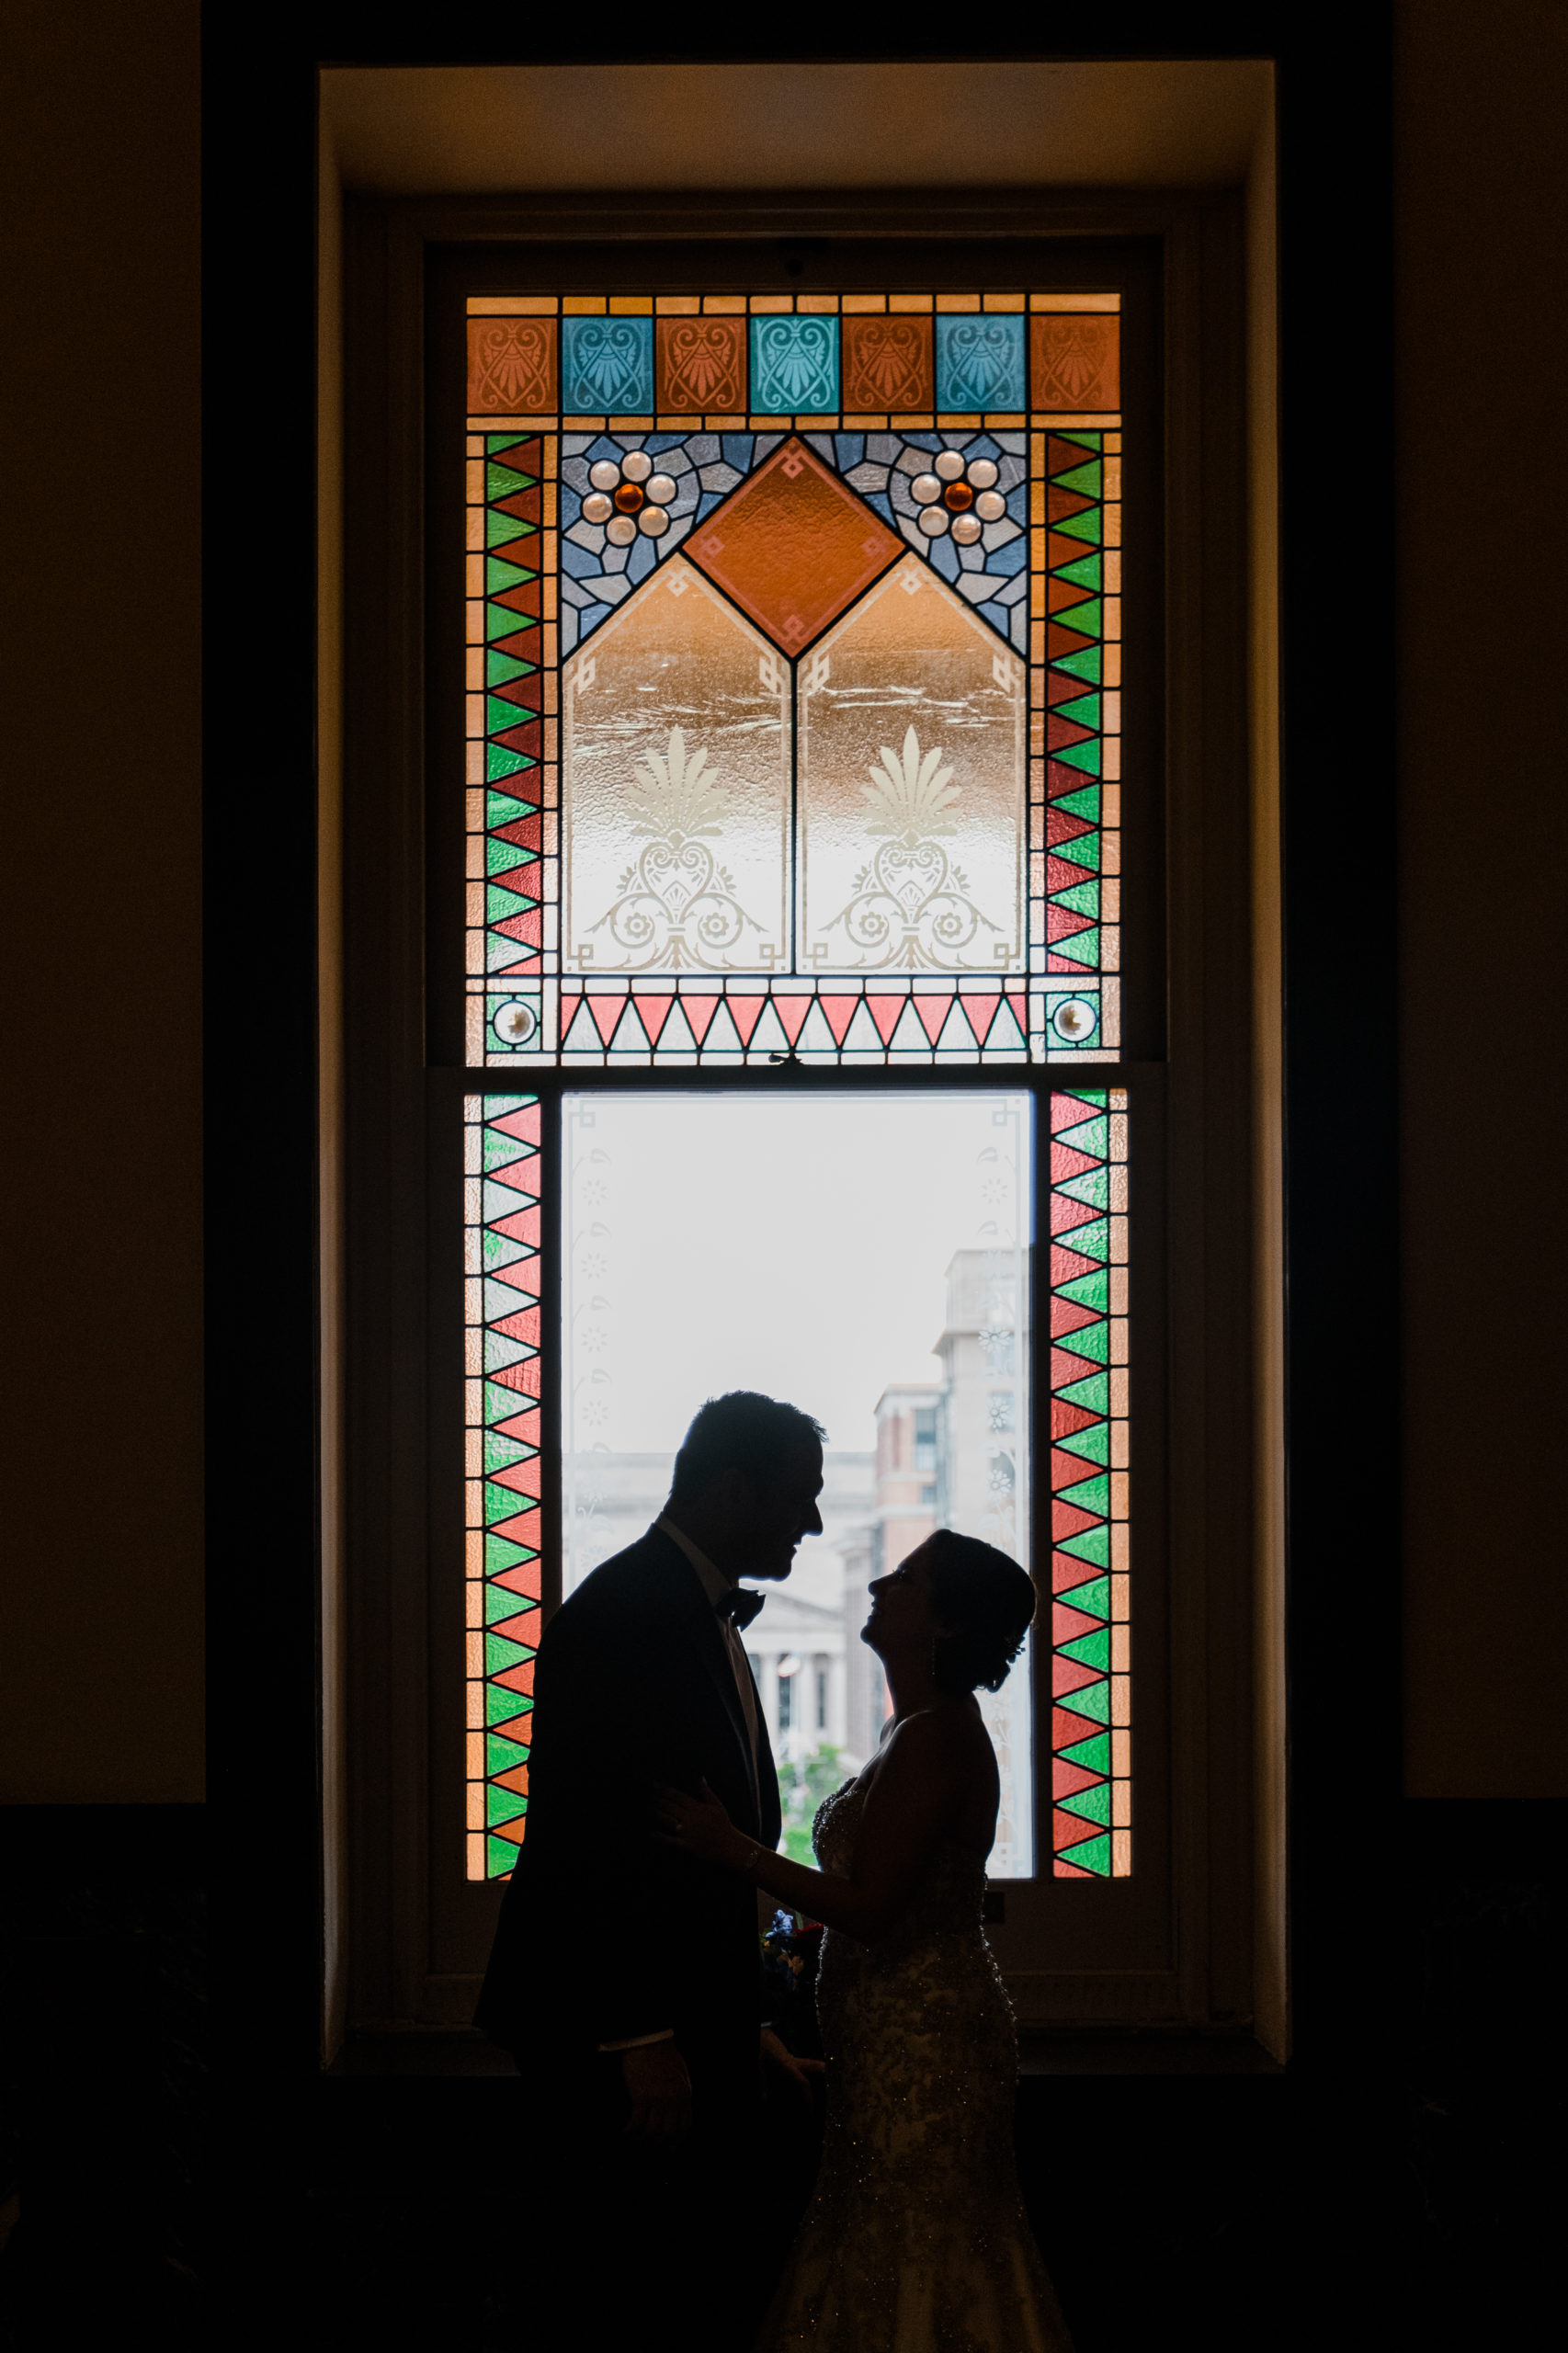 The bride and groom posing in front of a stained glass window